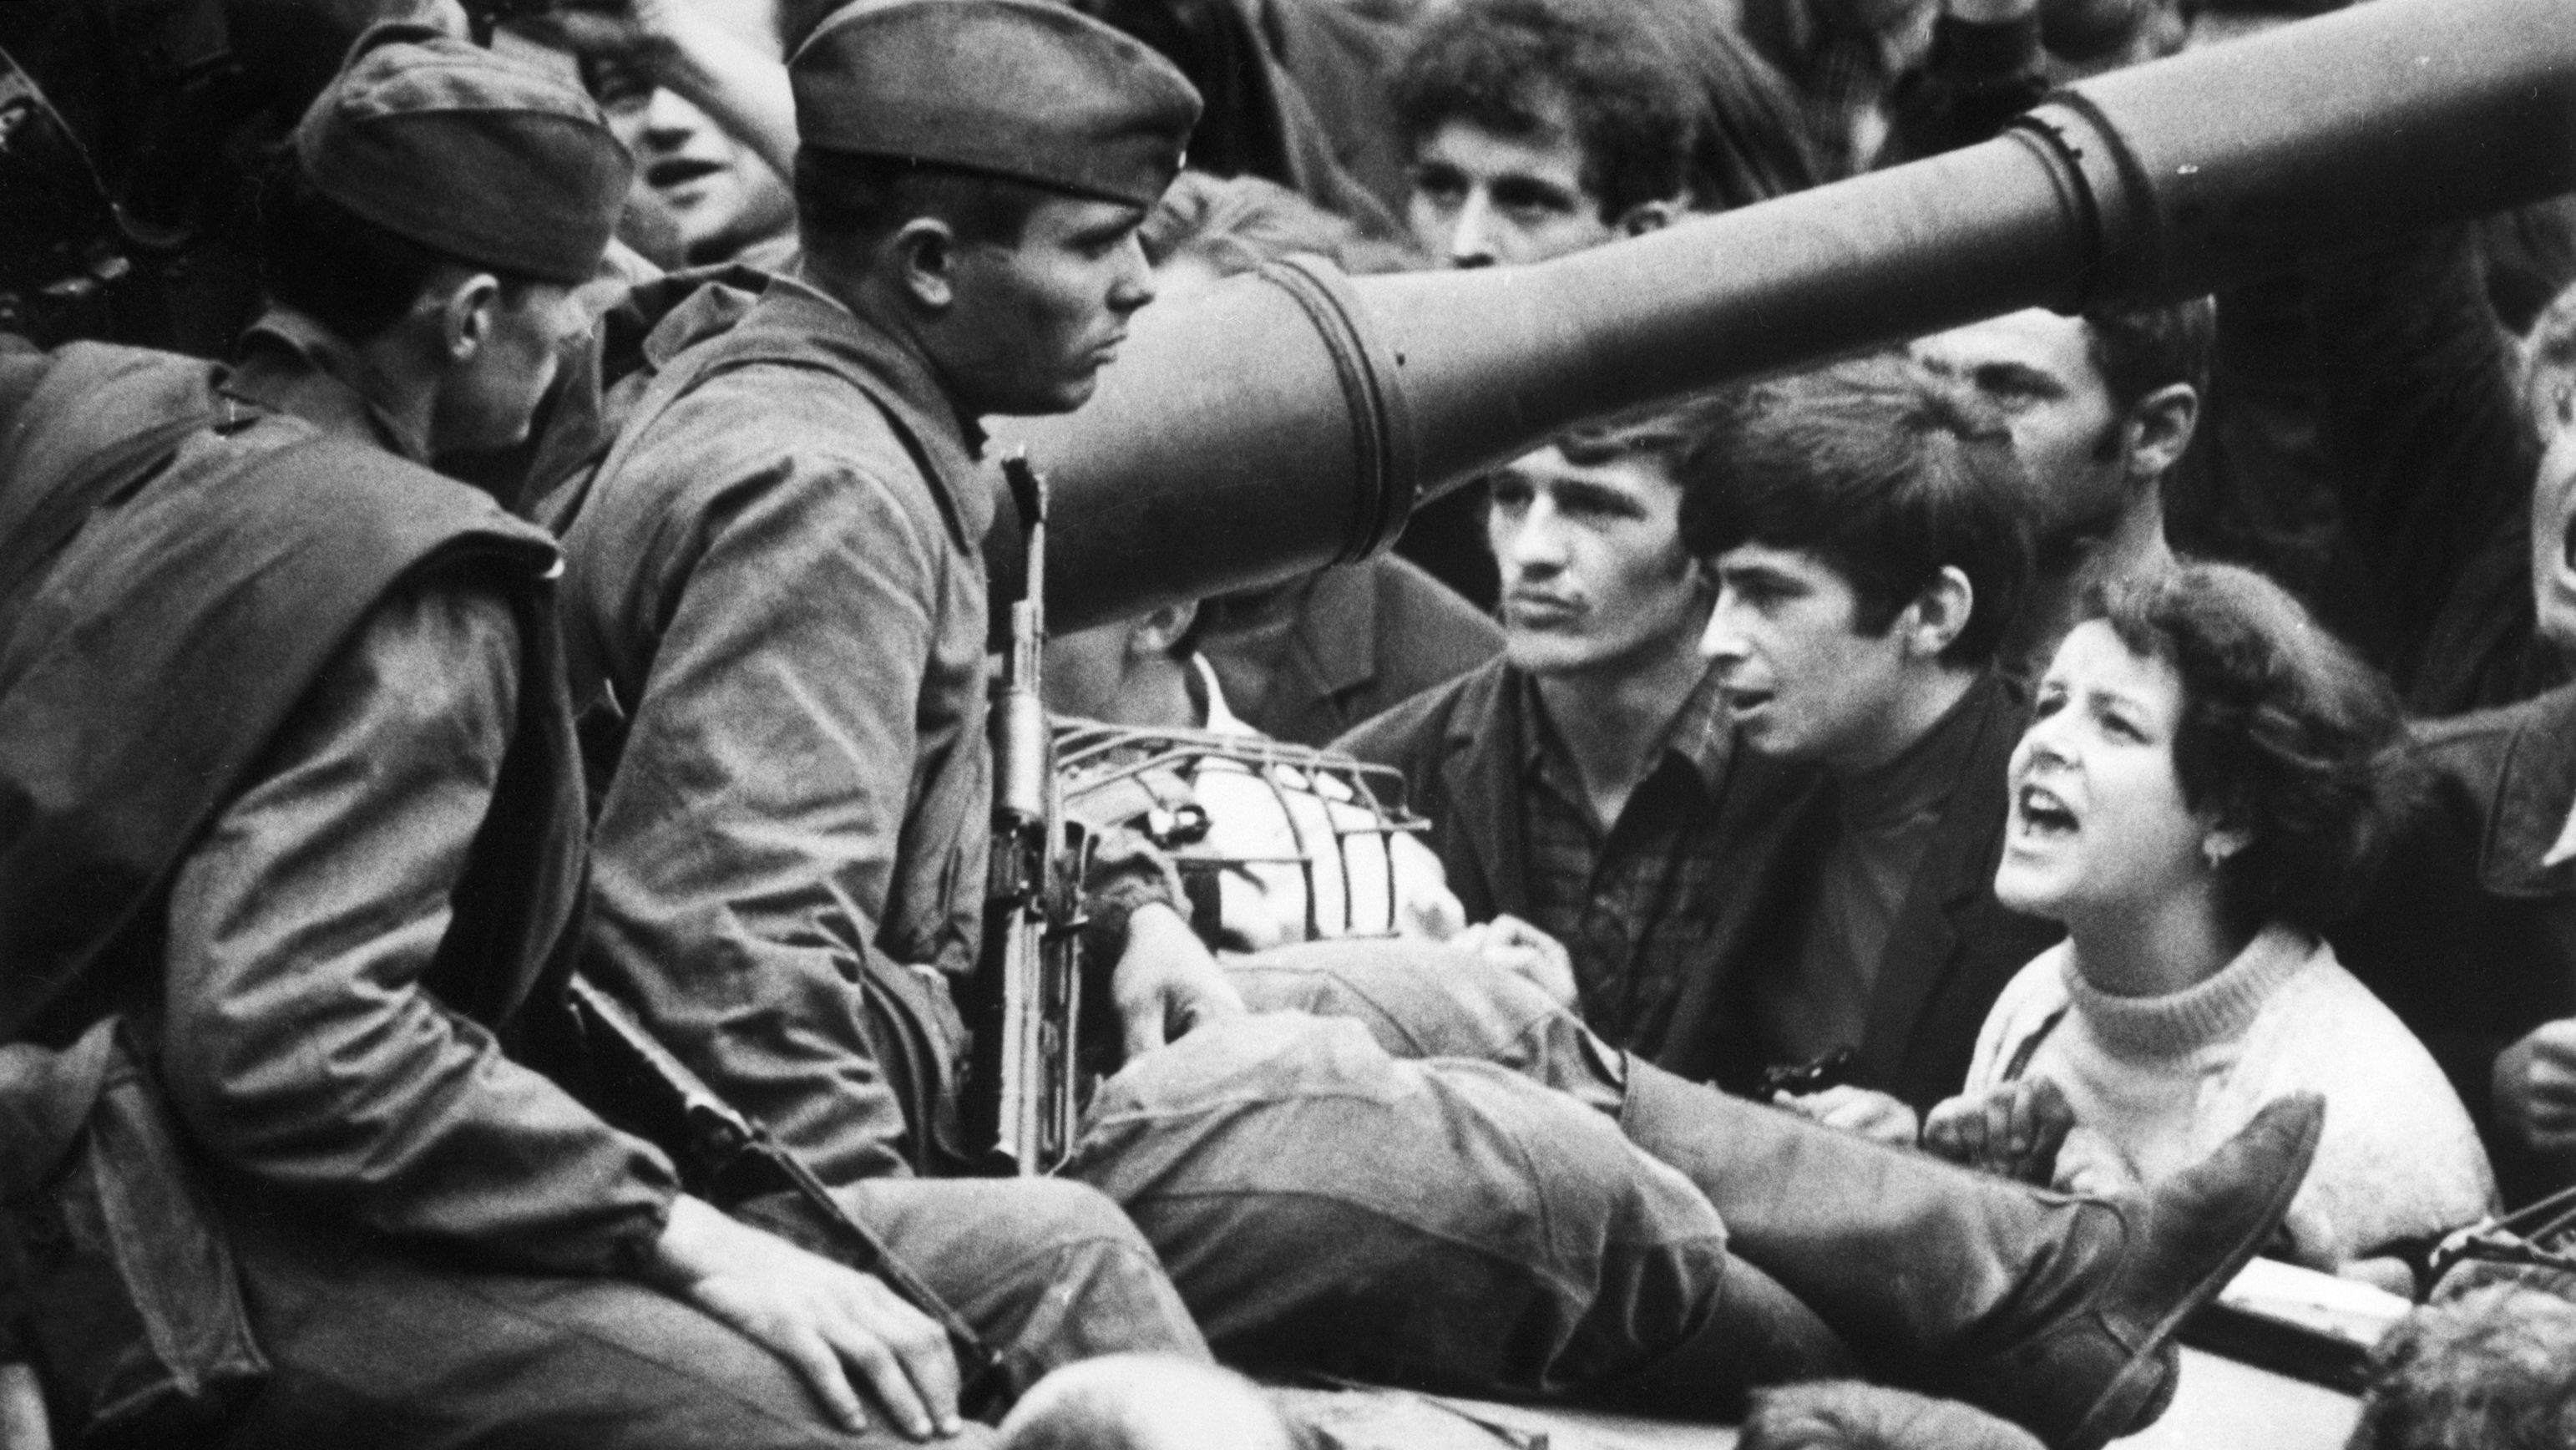 A young Czech woman shouts "Ivan go home!" to soldiers sitting on tanks in the streets of Prague in 1968. On January 5, 1968, reformer Alexander Dubcek became general secretary of the Communist Party in Czechoslovakia, pledging the "widest possible democratizations" as the Prague Spring movement swept across the country. Soviet and Warsaw Pact leaders sent an invasion force of 650,000 troops in August. Dubcek was arrested and hard-liners were restored to power.